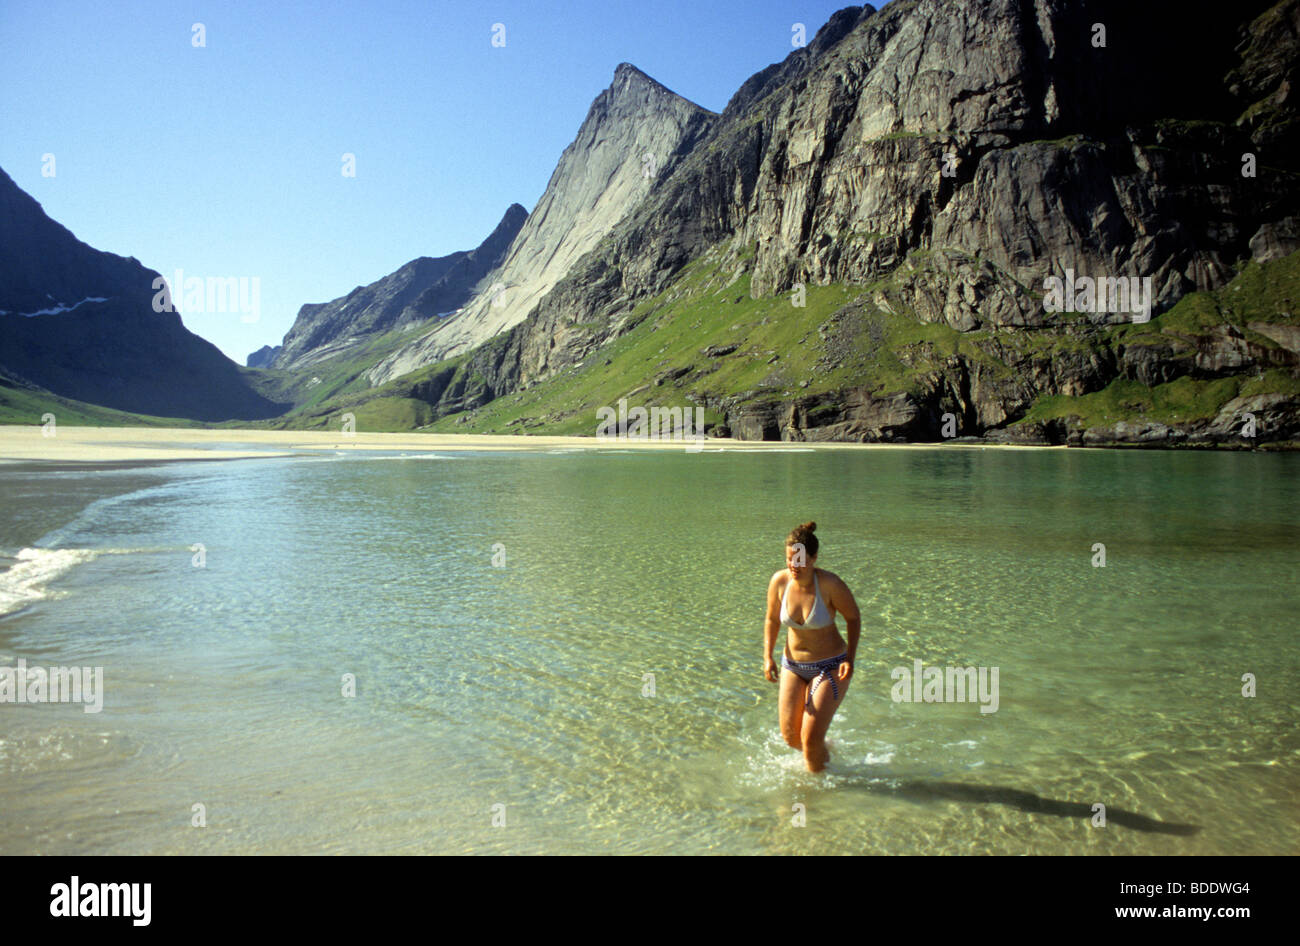 A young woman swims in the Icy Arctic waters of Horseid bay on Moskensoya Islands western wilderness. Lofoten, Norway. Stock Photo